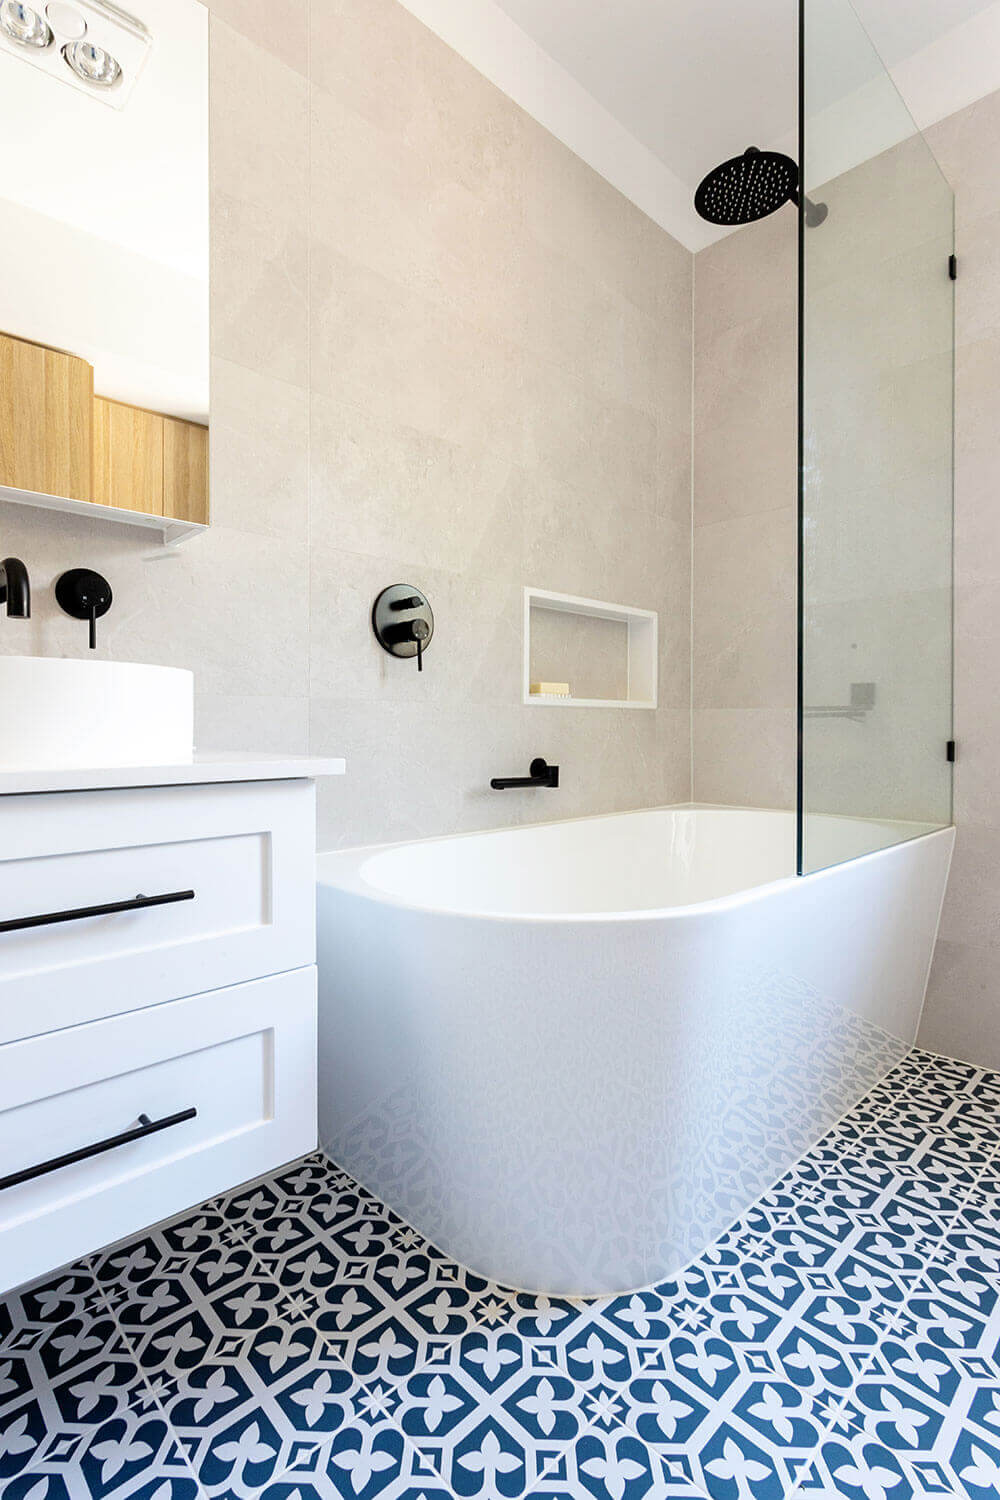 A bathroom with a blue and white tiled floor that requires home renovation.